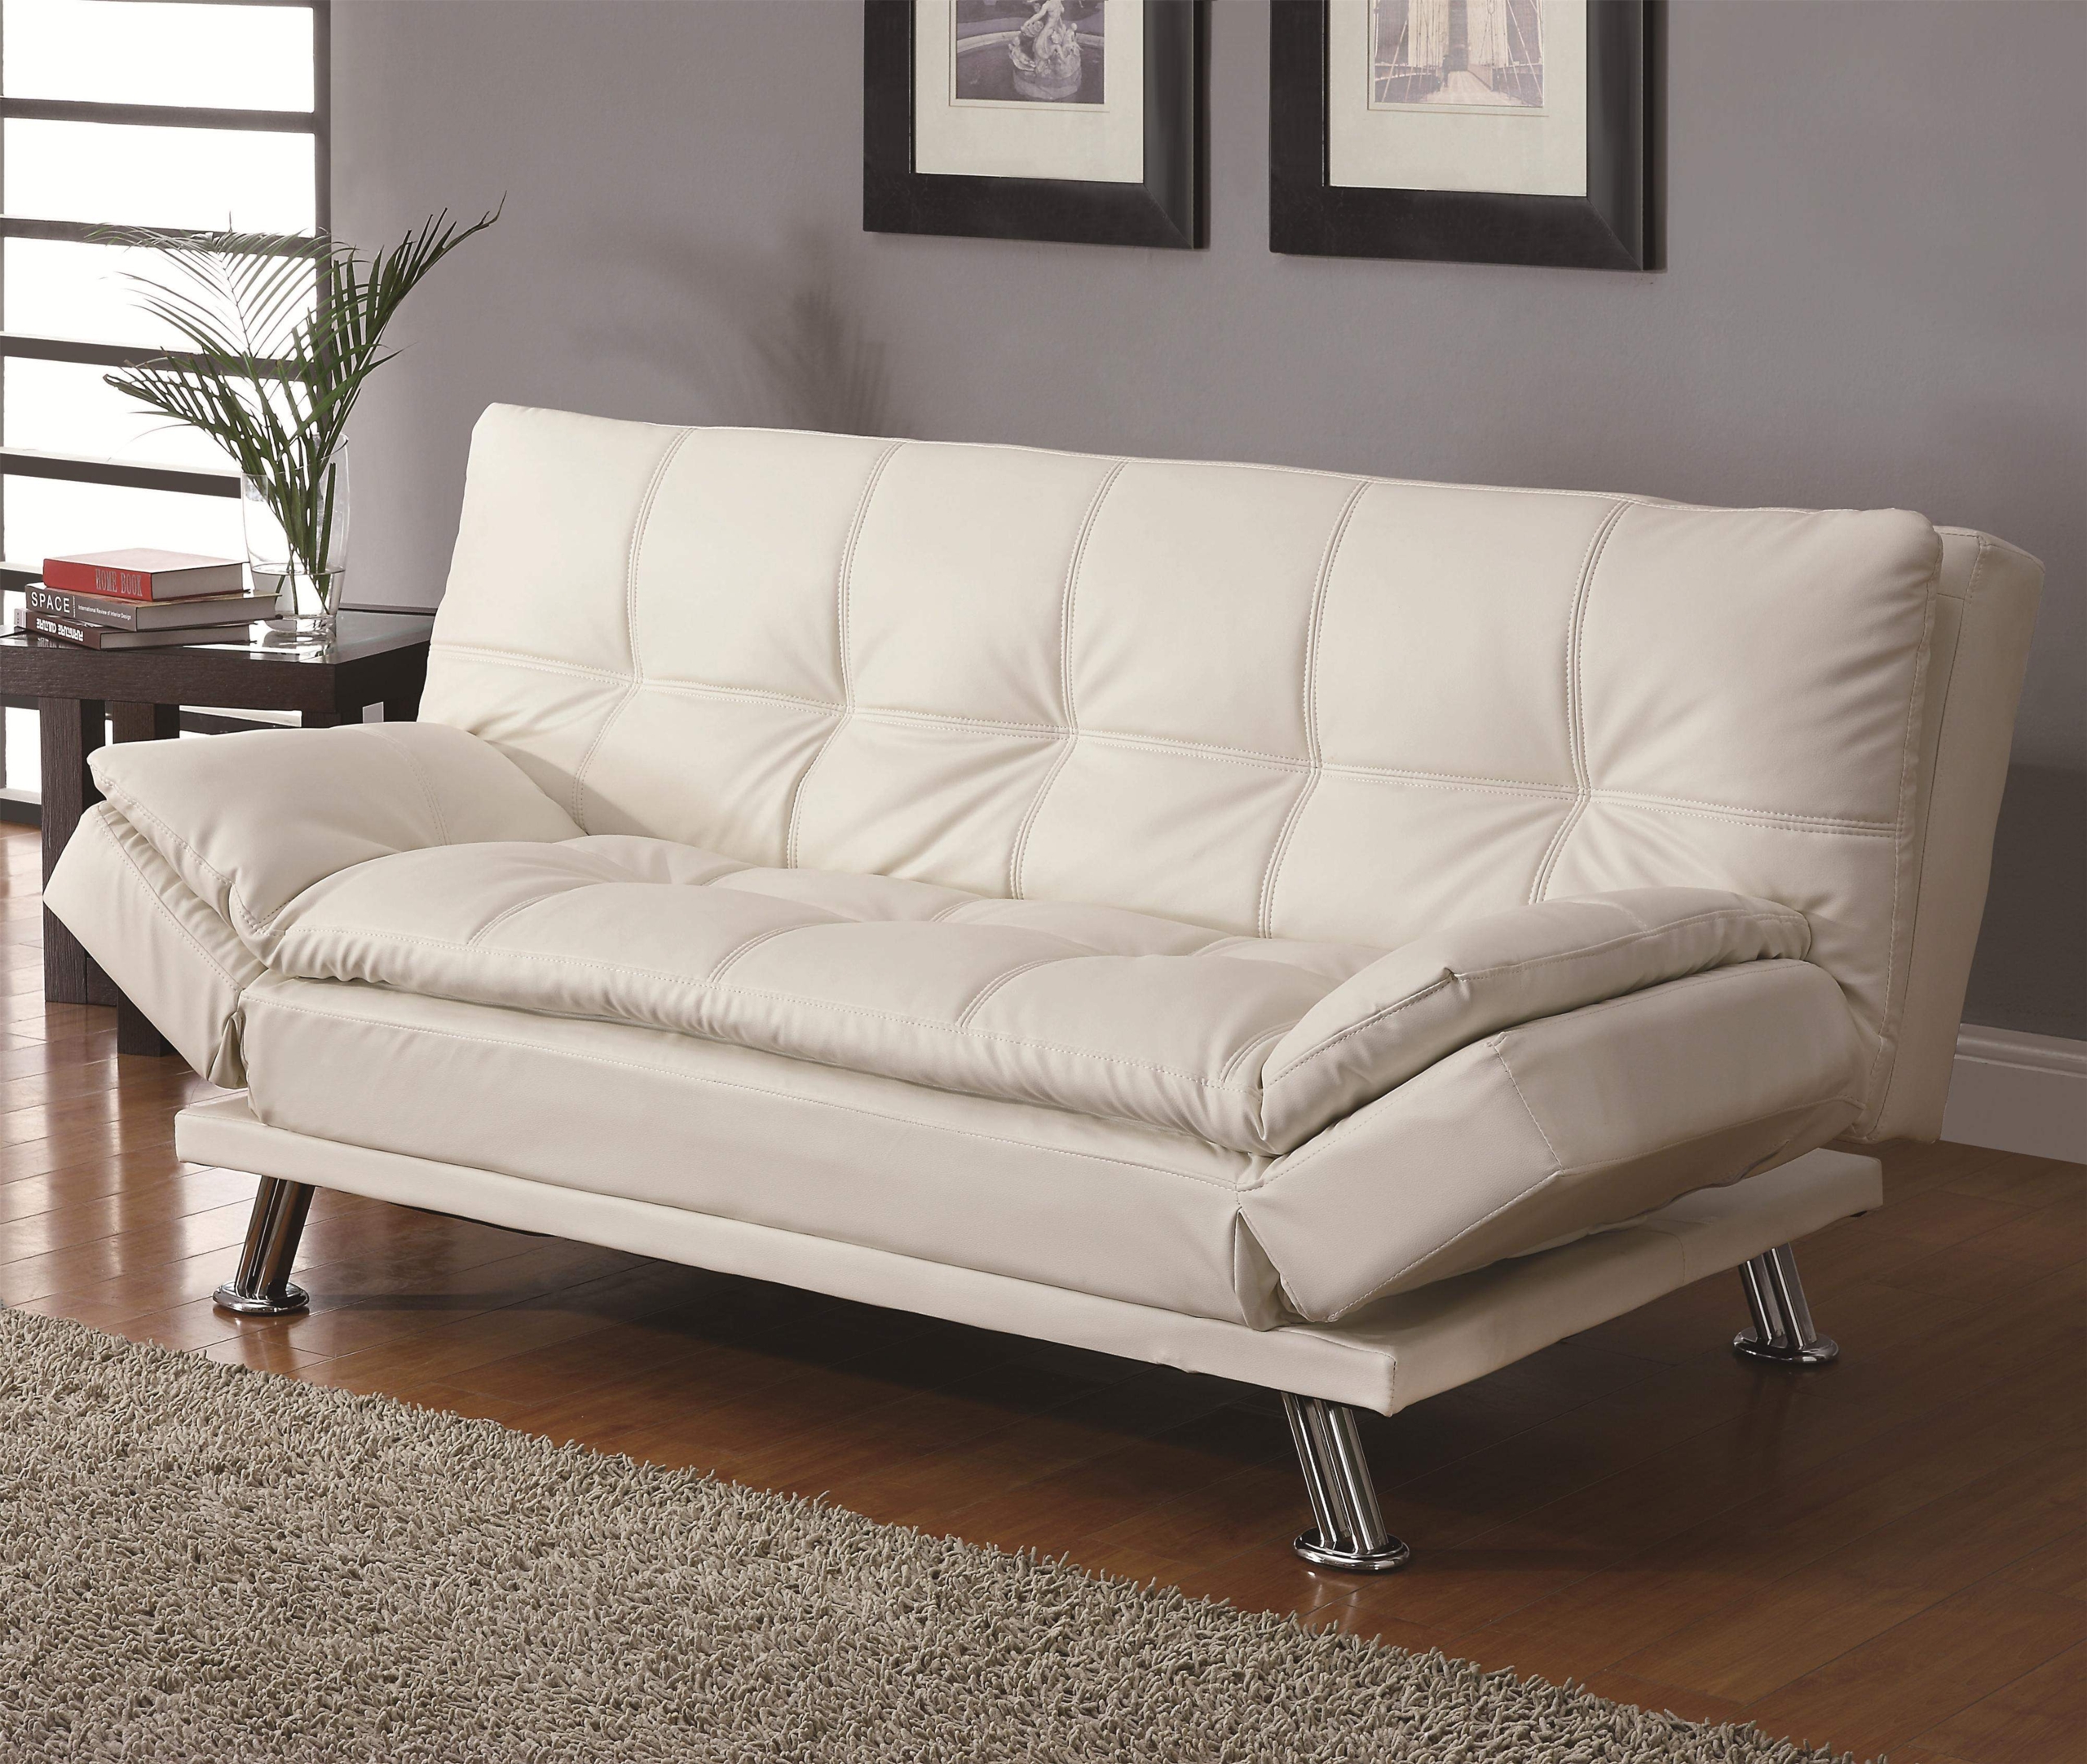 New ryland contemporary white bycast leather futon sofa bed sleeper